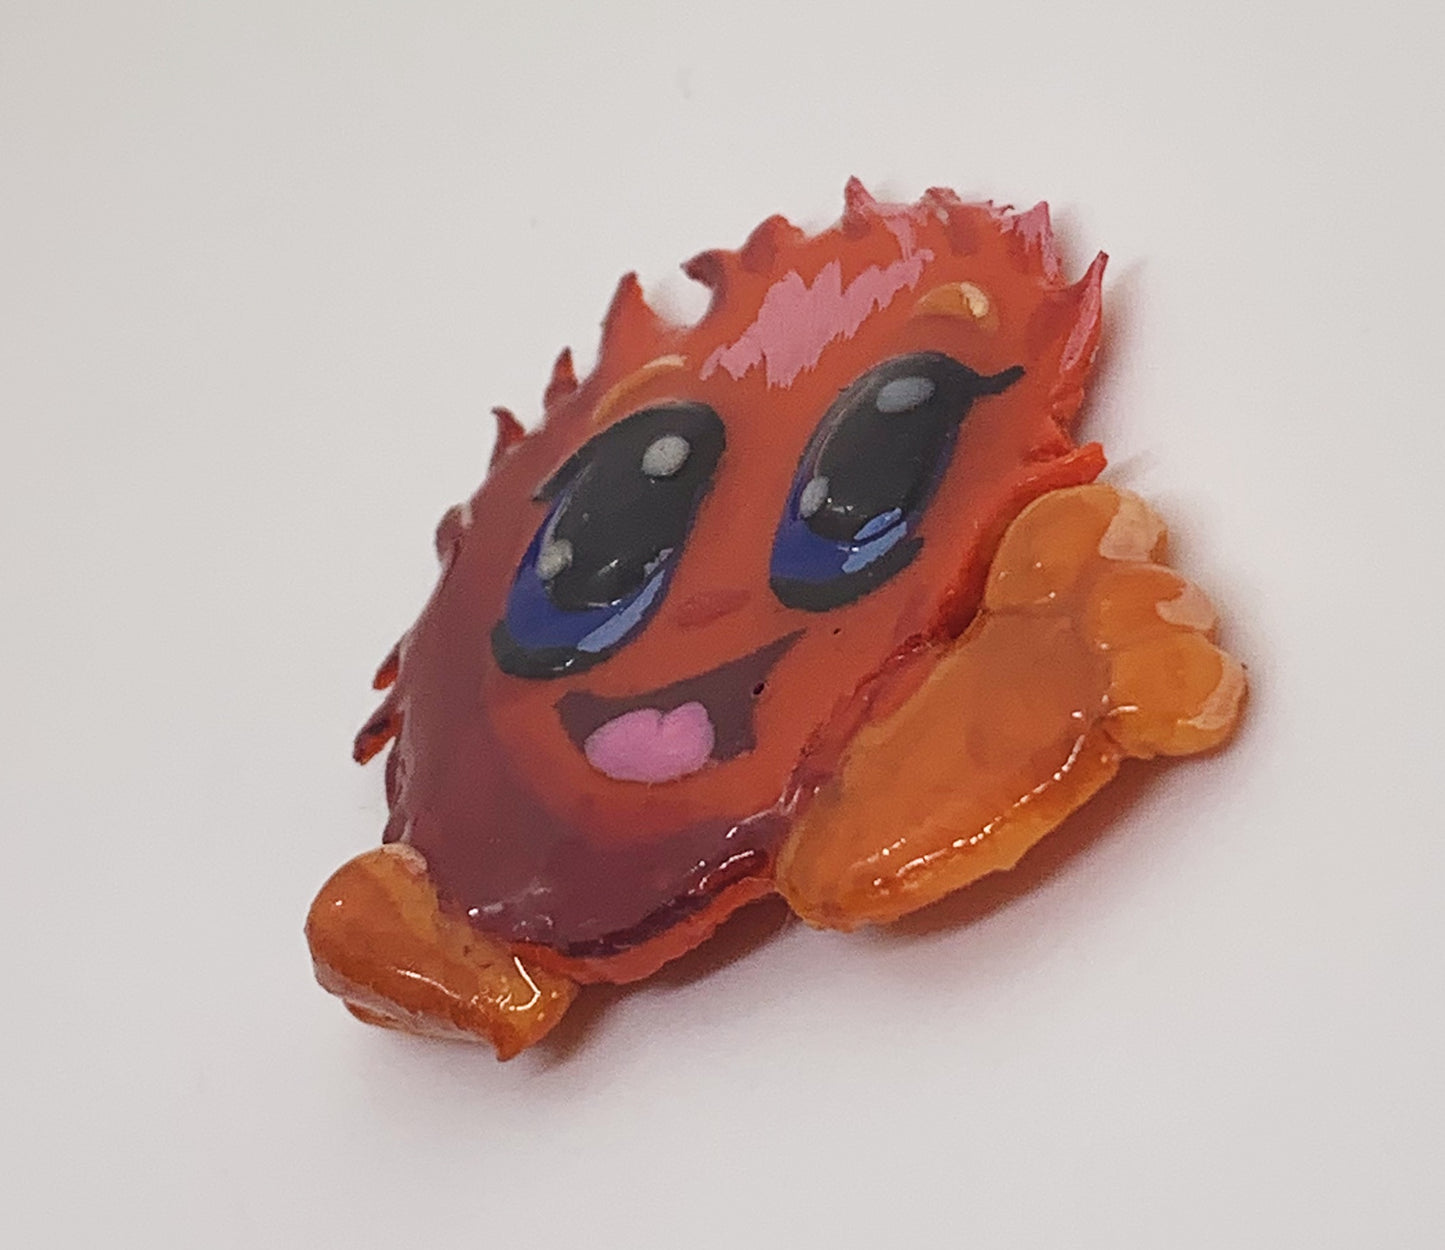 Discounted Neopet Pin